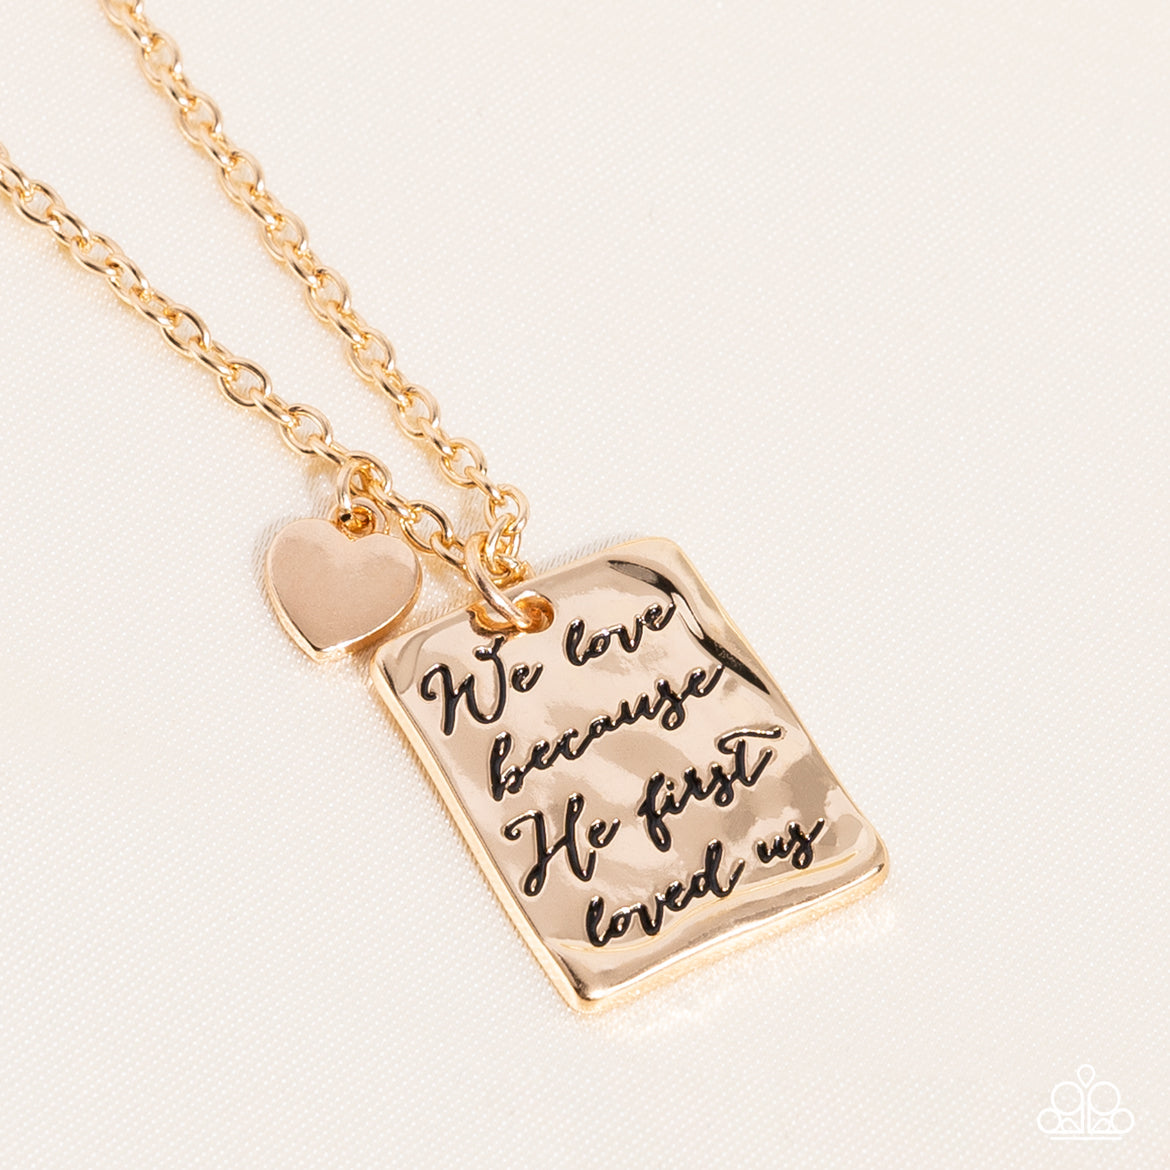 Divine Devotion - Gold "We love because he first loved us" Pendant Paparazzi Necklace & matching earrings